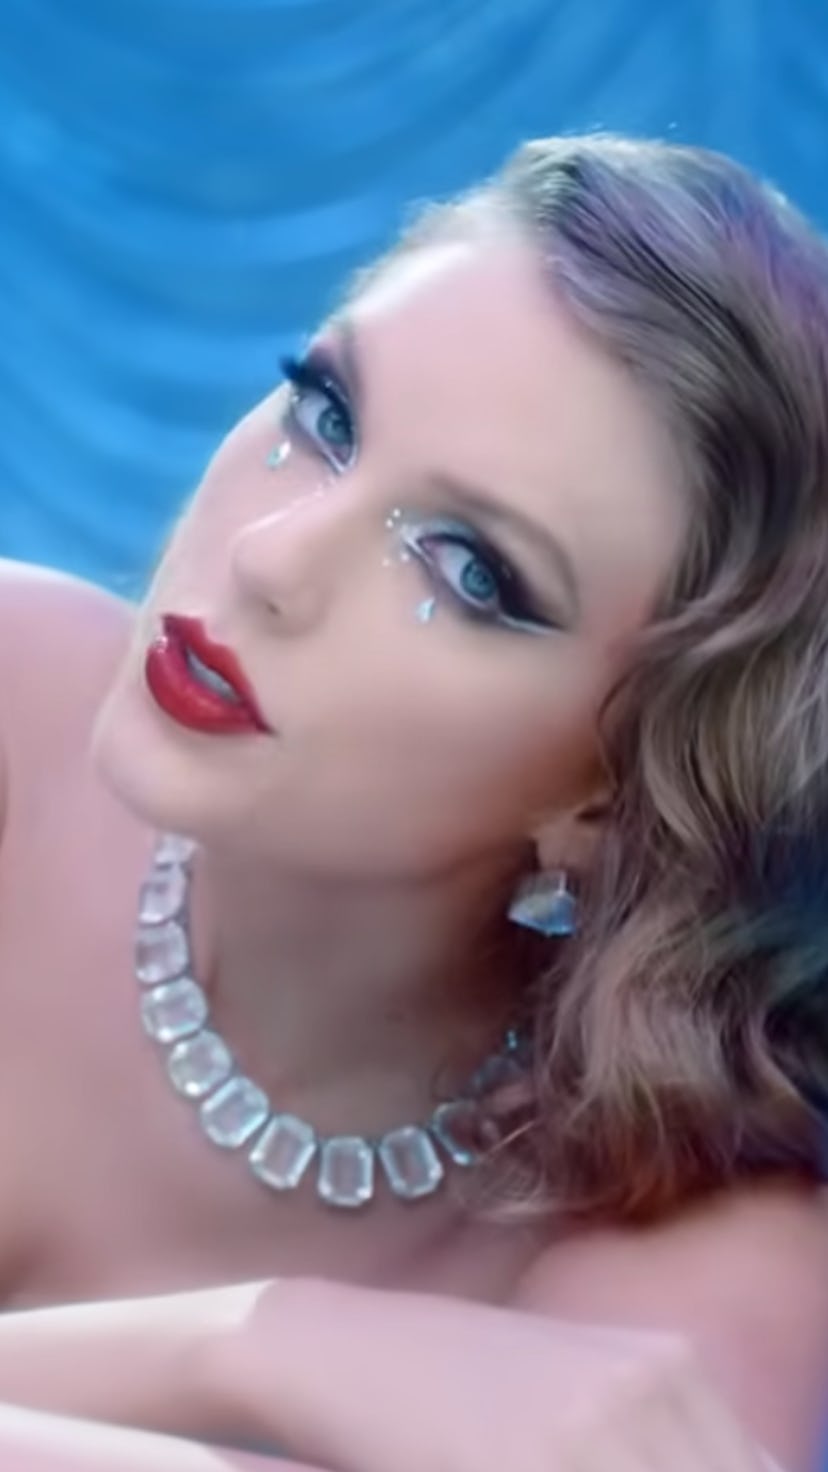 Singer Taylor Swift's 2nd music video from her album Midnights, "Bejeweled" inspired by Cinderella